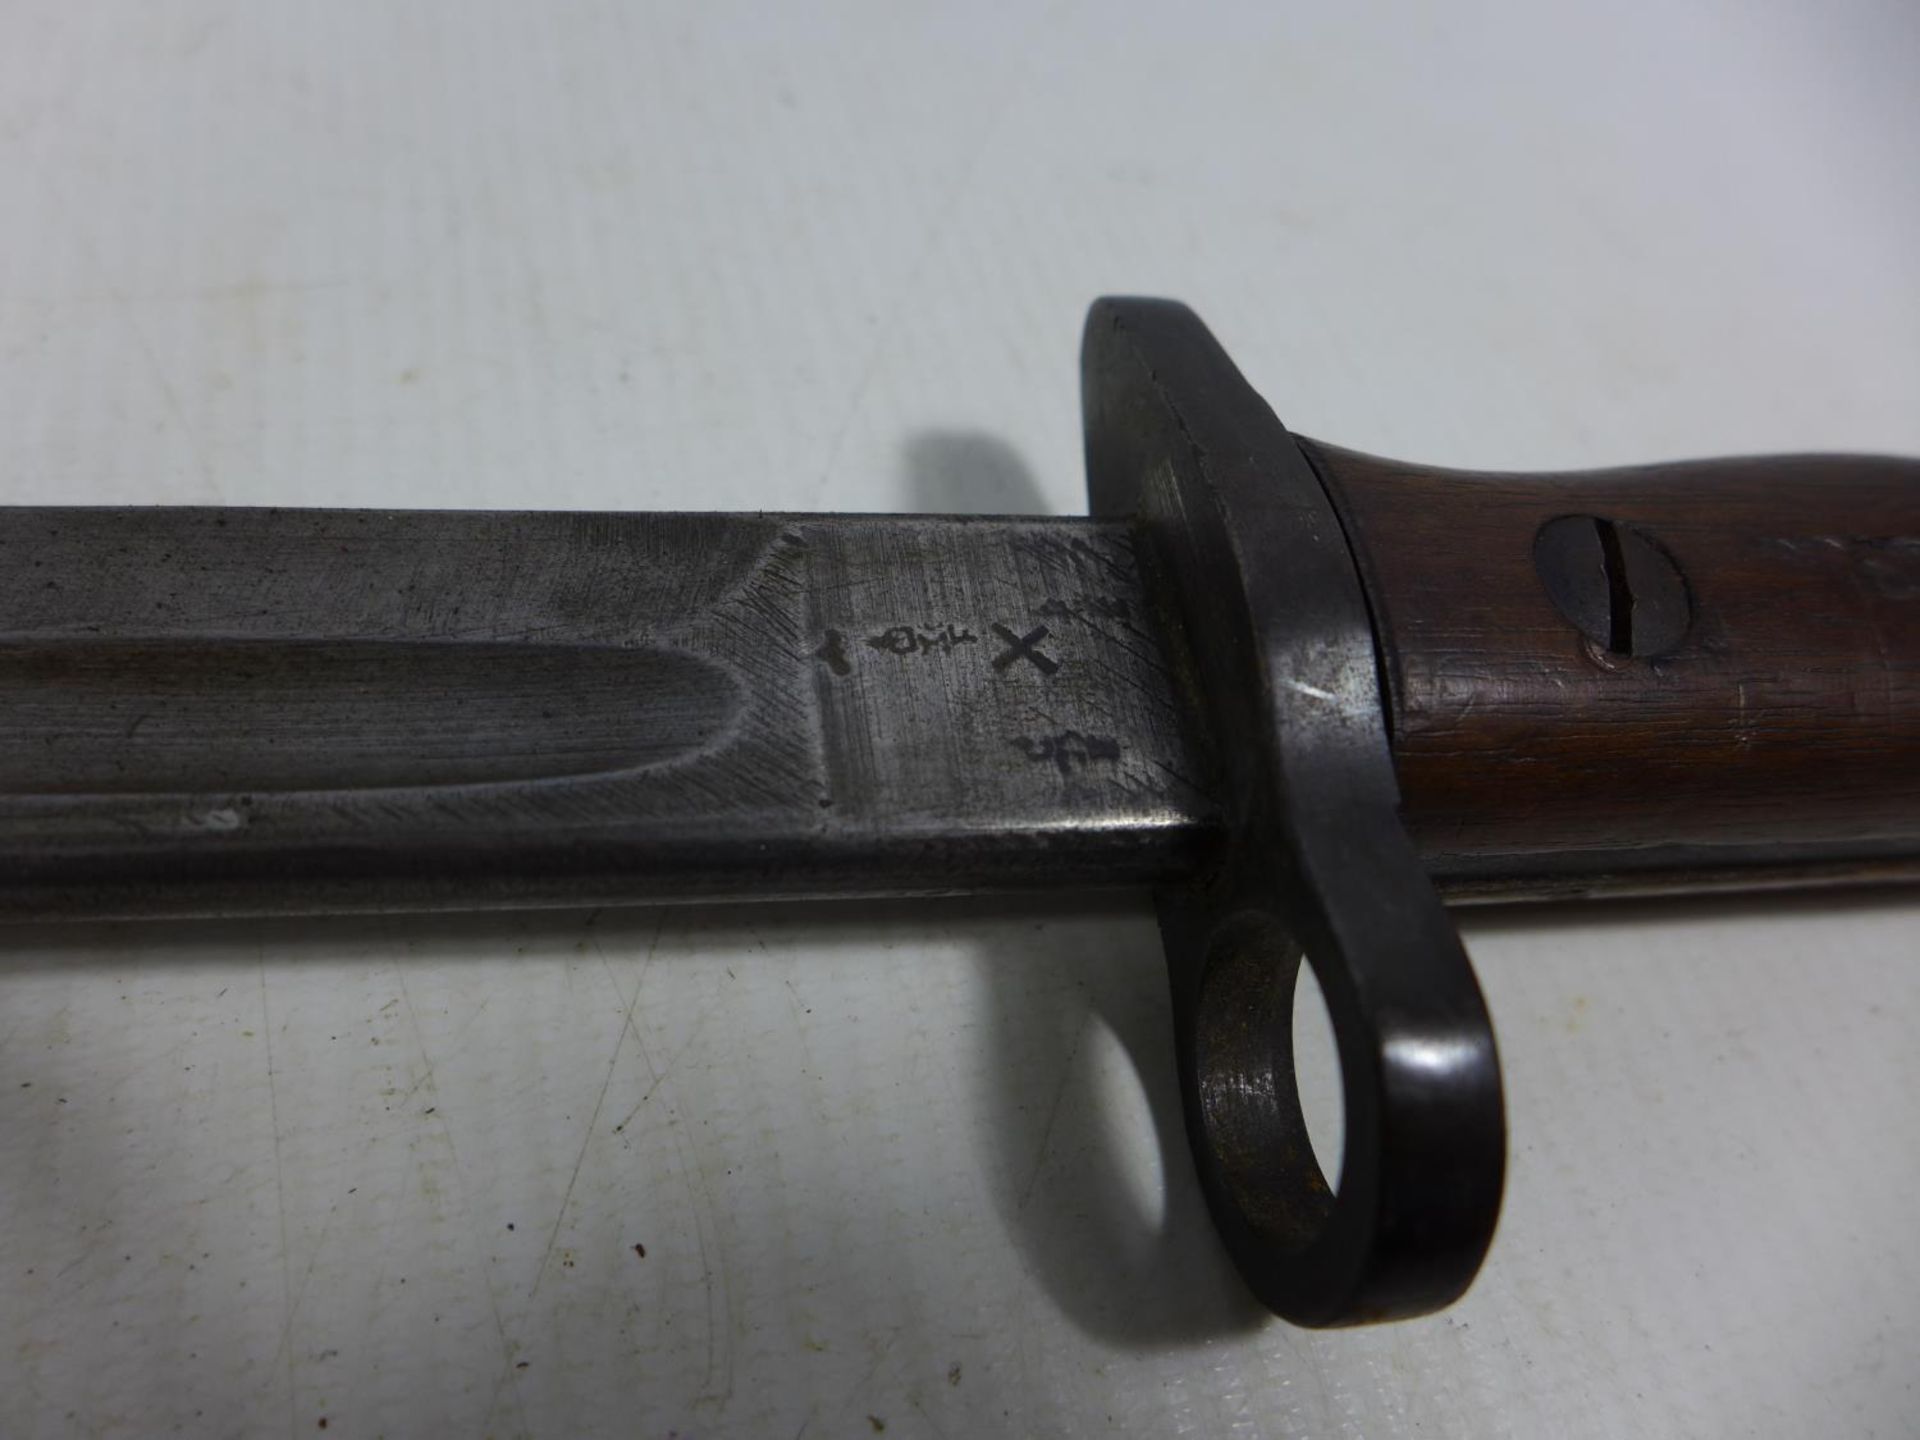 A BRITISH ARMY WORLD WAR I 1907 PATTERN BAYONET AND SCABBARD BY WILKINSON, 43CM BLADE - Image 4 of 7